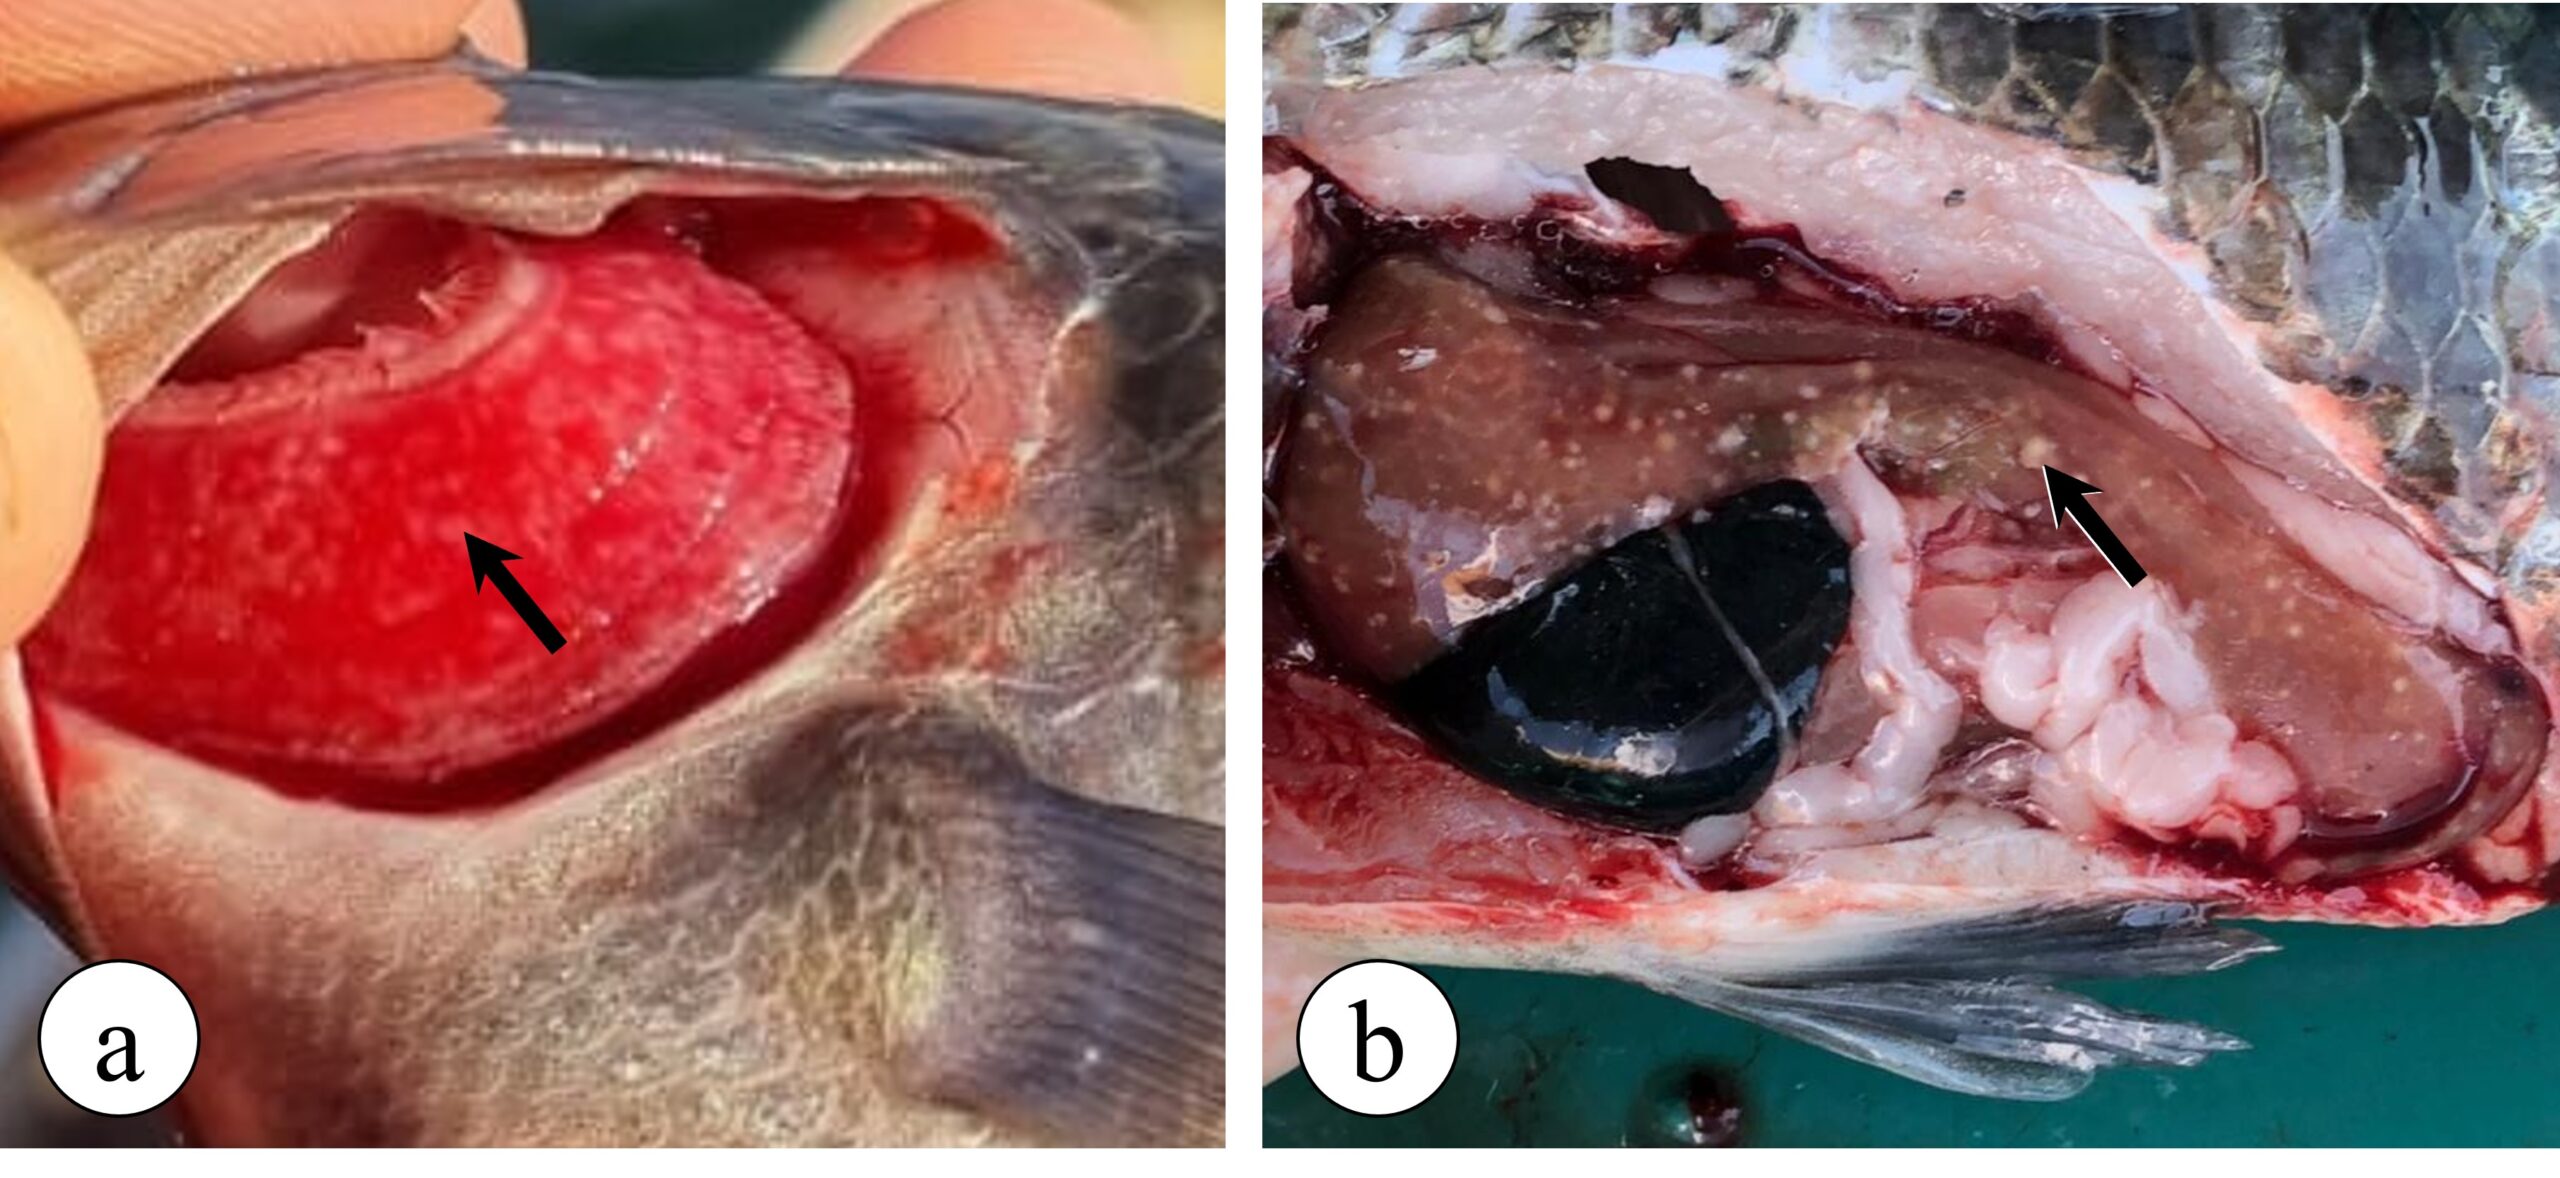 Figure 3. Granulomatous lesions observed in Nile tilapia with francisellosis. (a) Gill granulomatosis (arrow), where numerous white spots (granulomas) can be seen on the gill filaments. (b) Hepatic granulomatosis (arrow), where several white spots can be seen in the liver of a diseased tilapia fish, indicating the presence of granulomas.